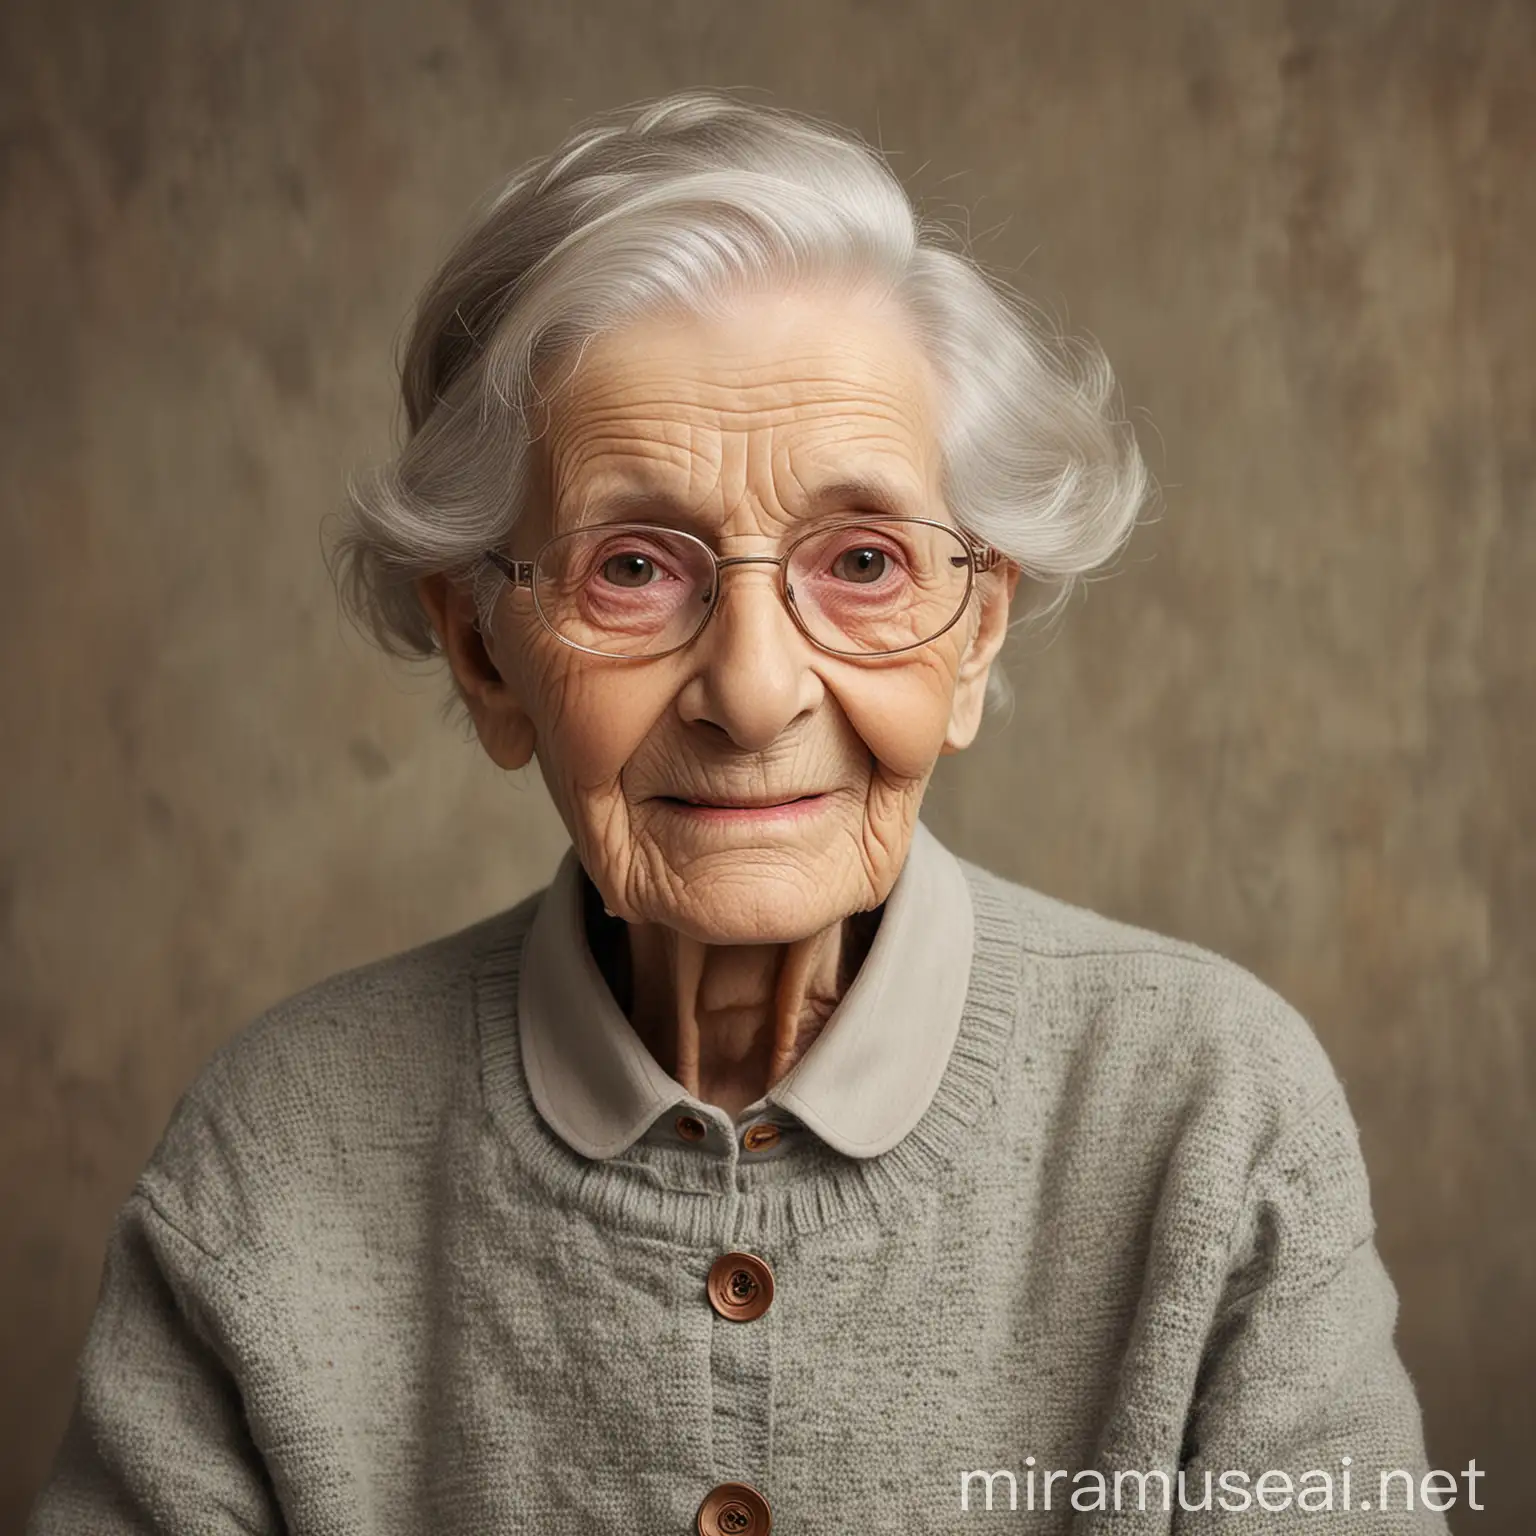 Portrait of a Centenarian with Wisdom and Grace